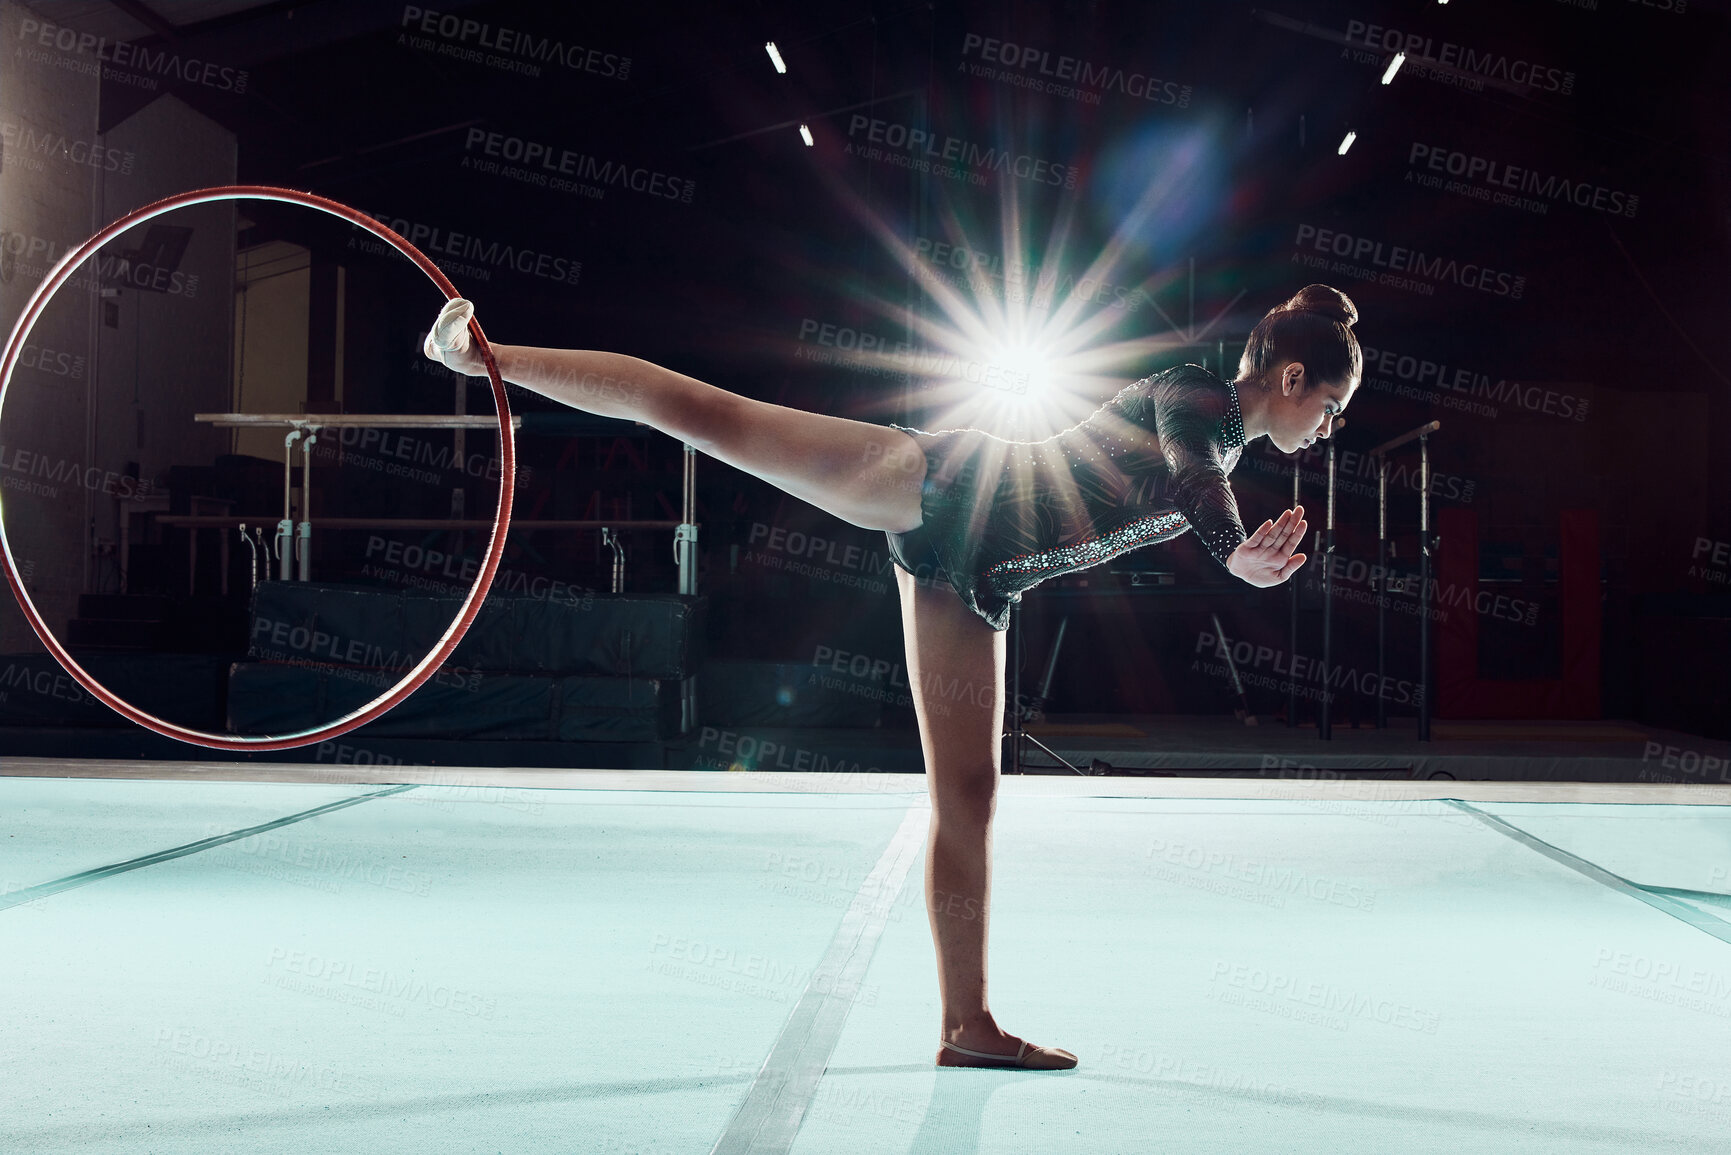 Buy stock photo Gymnastics, dance and sport with a woman gymnast performance on a floor with a hoop or ring. Olympics, rhythm and agile dancer performing a routine, recital or training for a competitive event